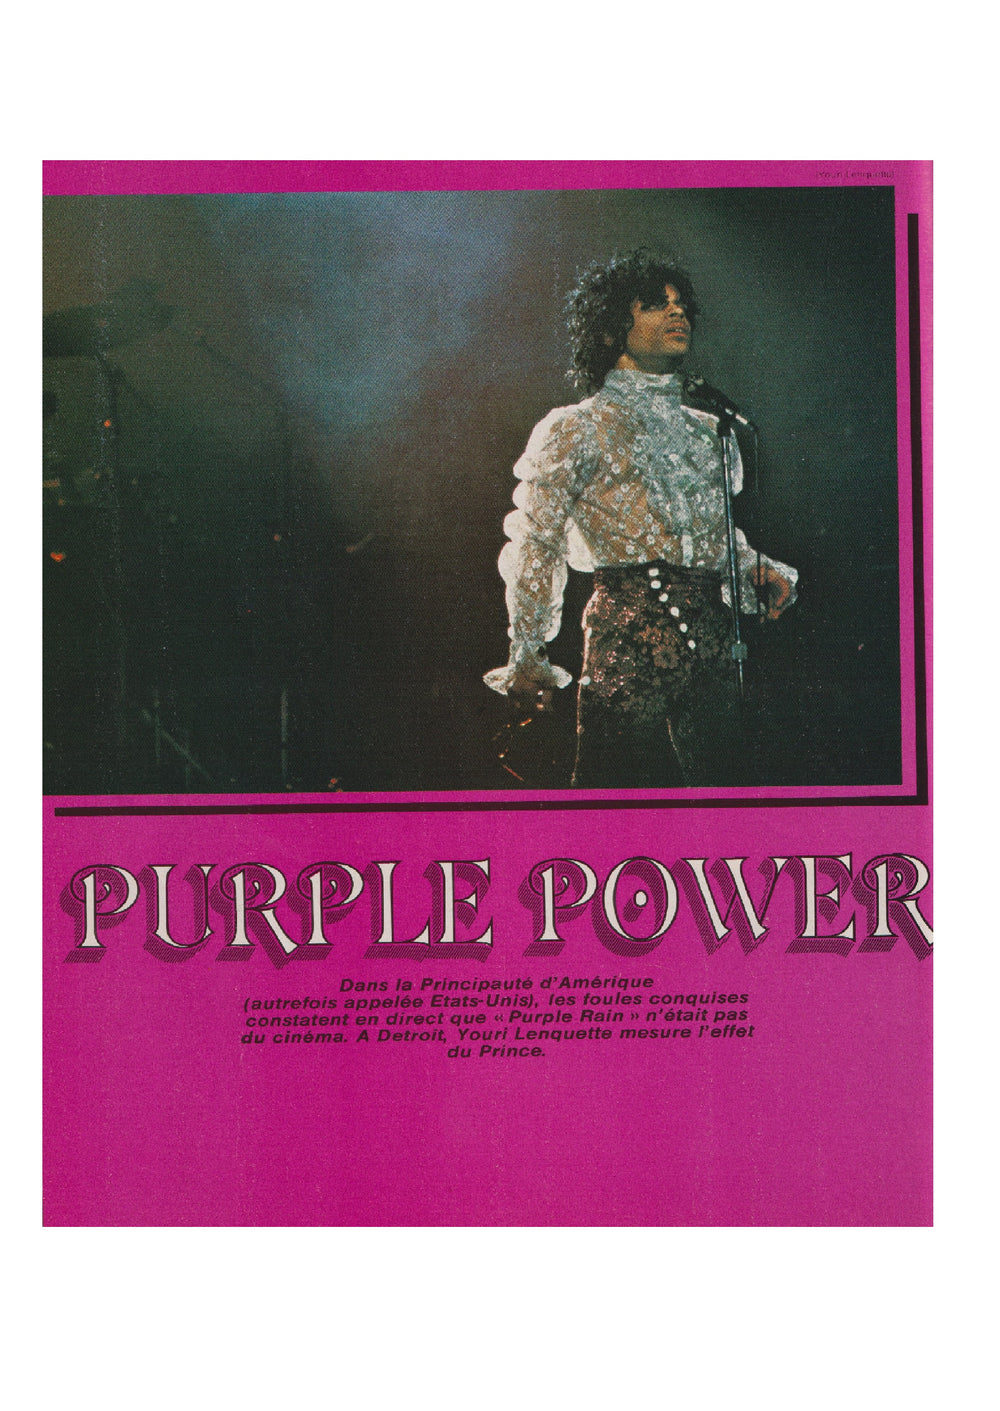 Prince French Best Magazine 1985 Cover & Article